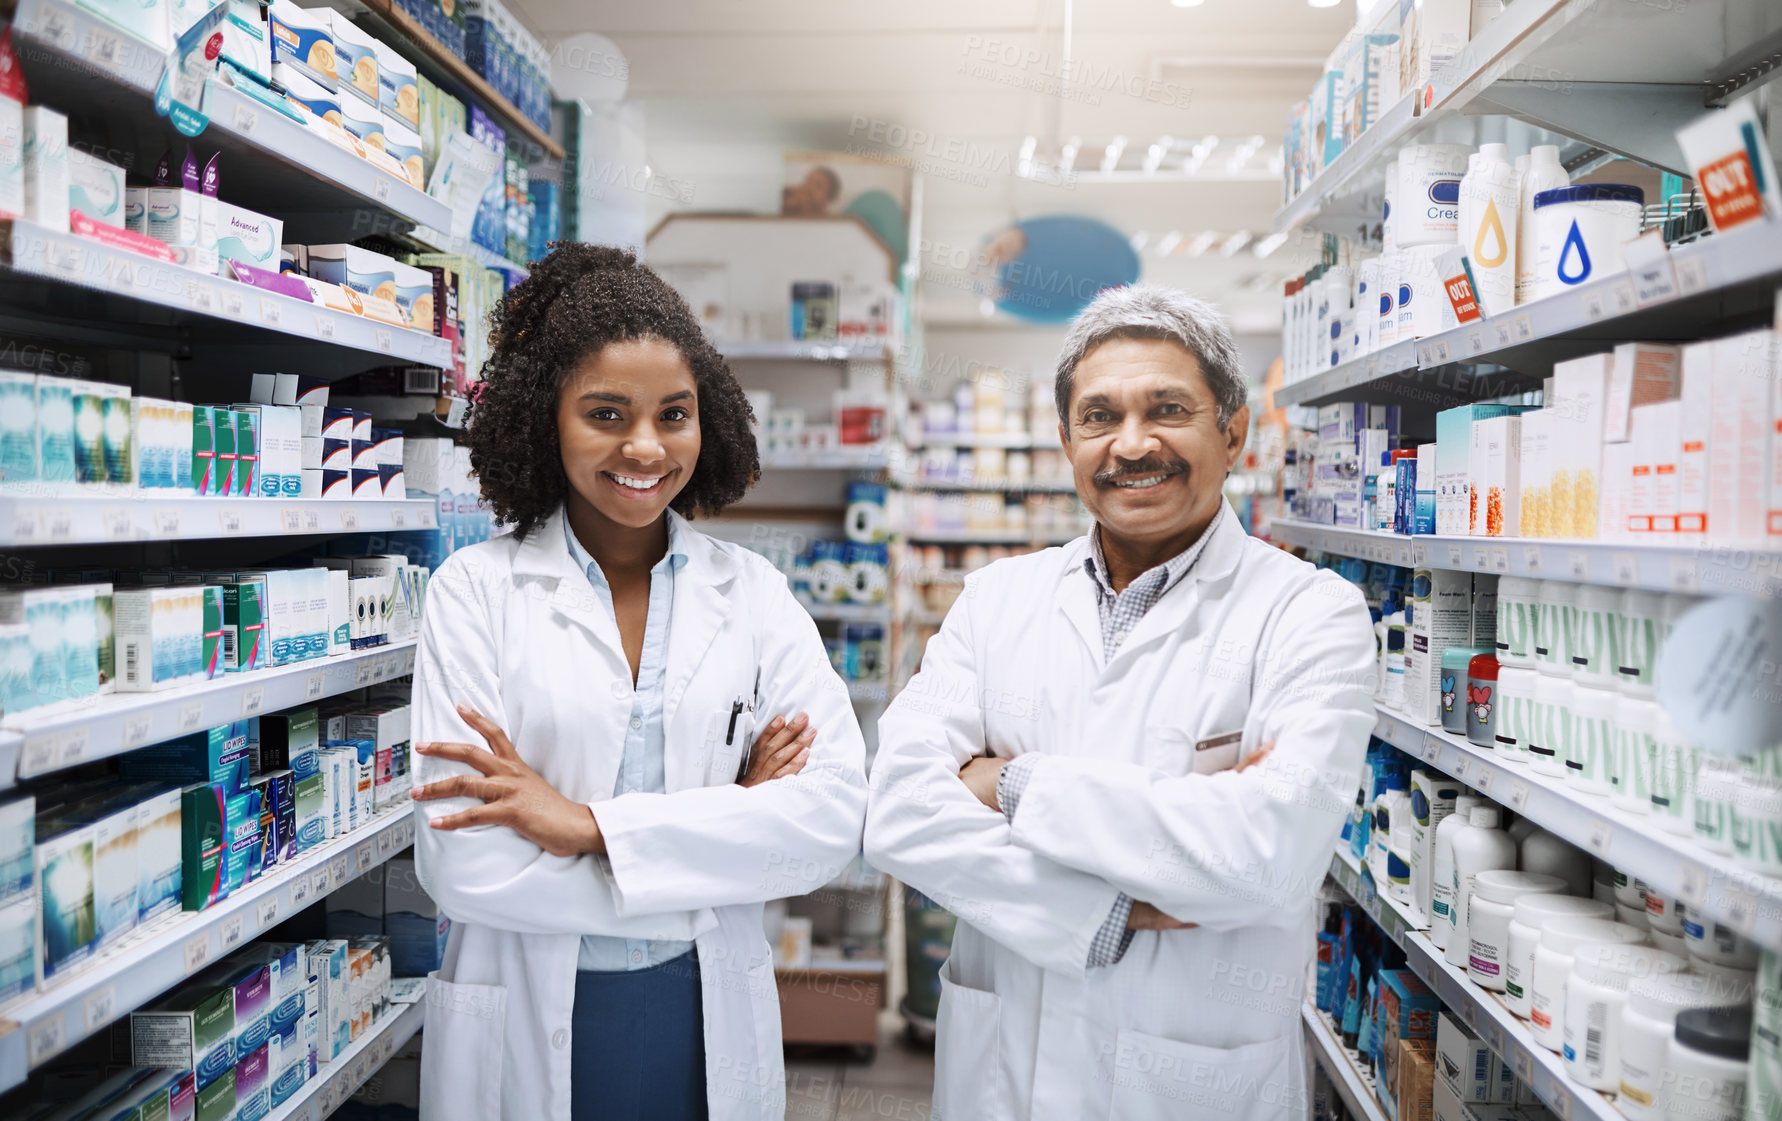 Buy stock photo Cropped portrait of two pharmacists standing together with their arms crossed in a pharmacy